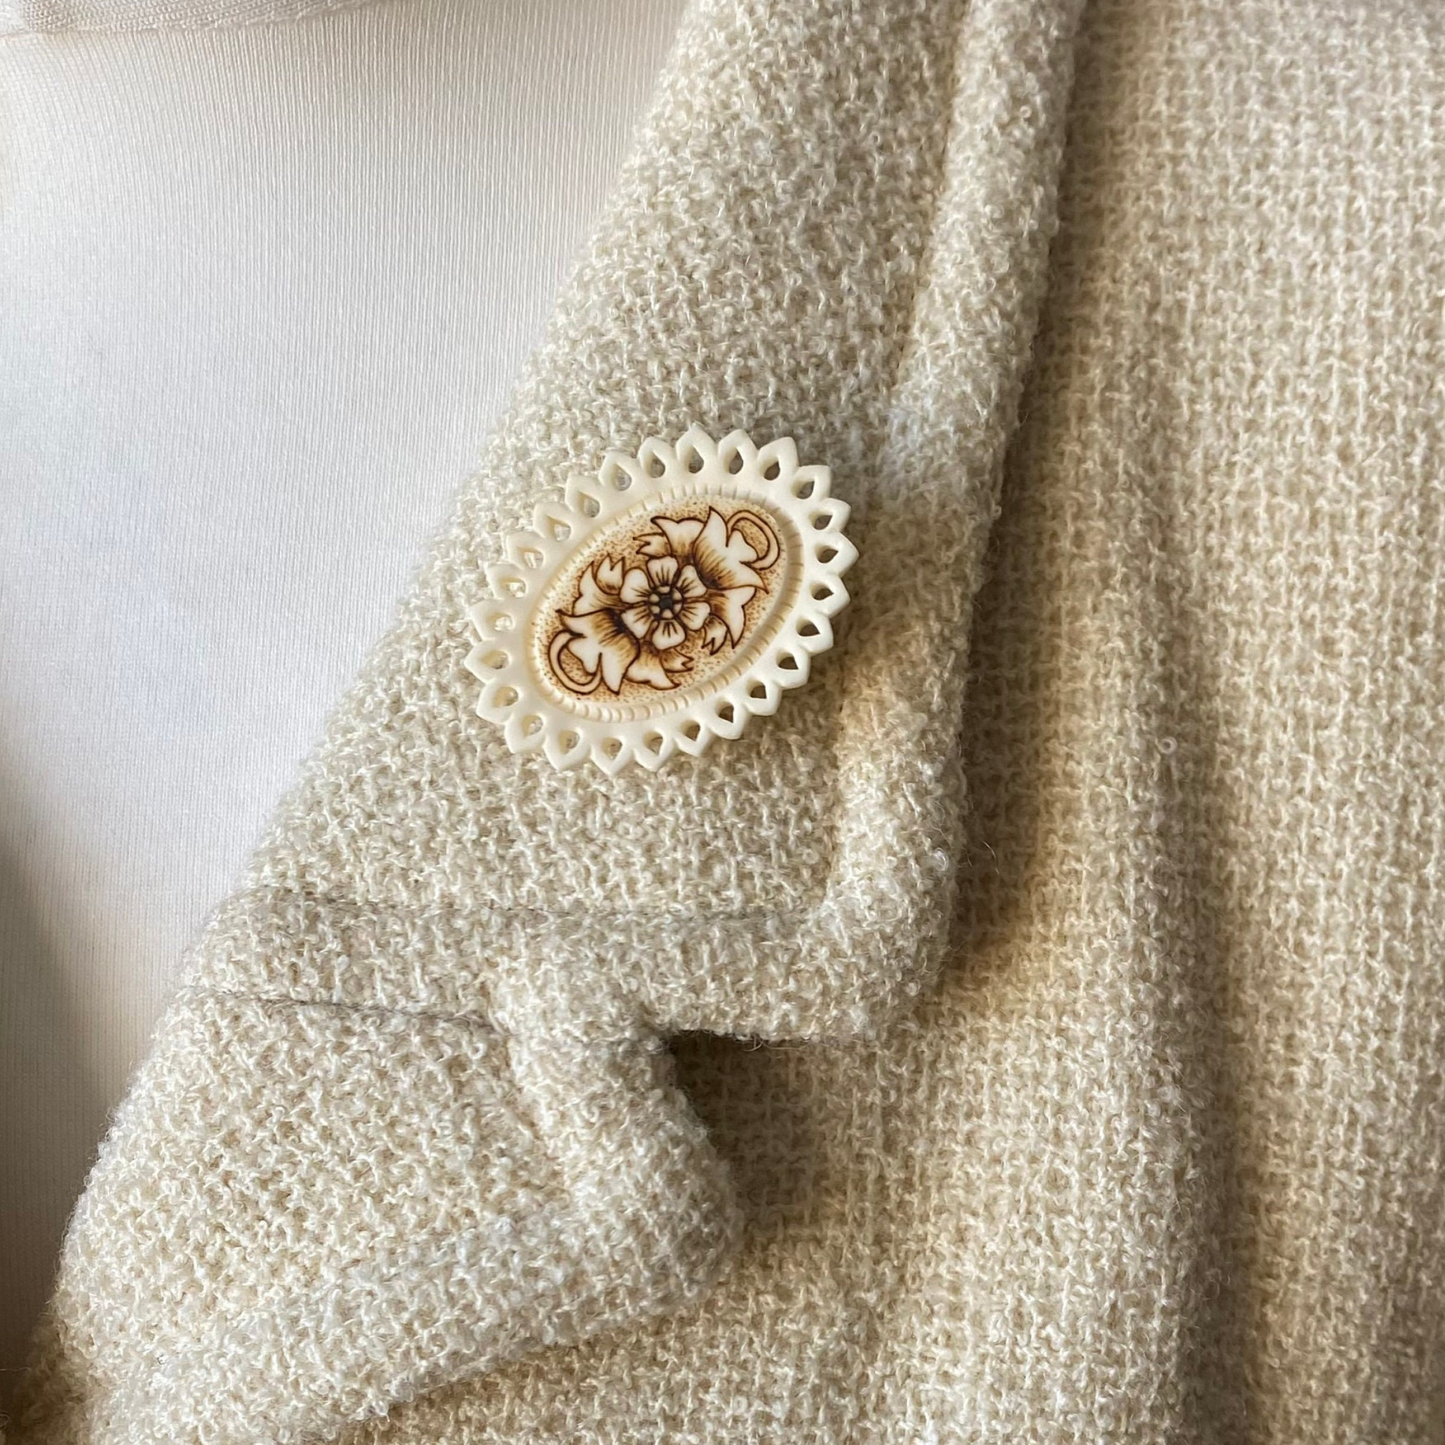 Cream and brown floral brooch on jacket